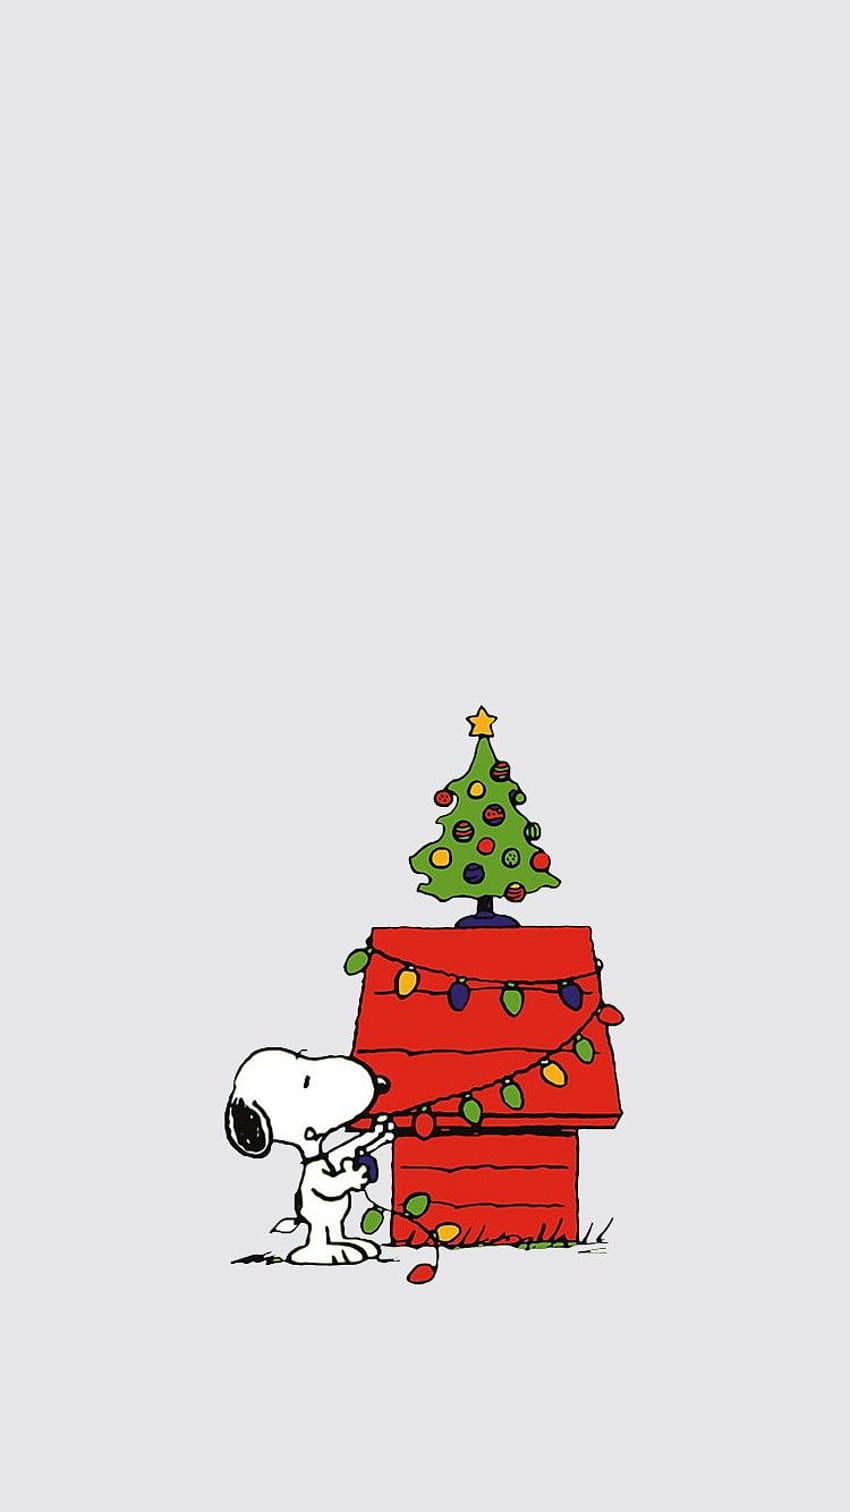 200 Simple Christmas Background s  Wallpaperscom